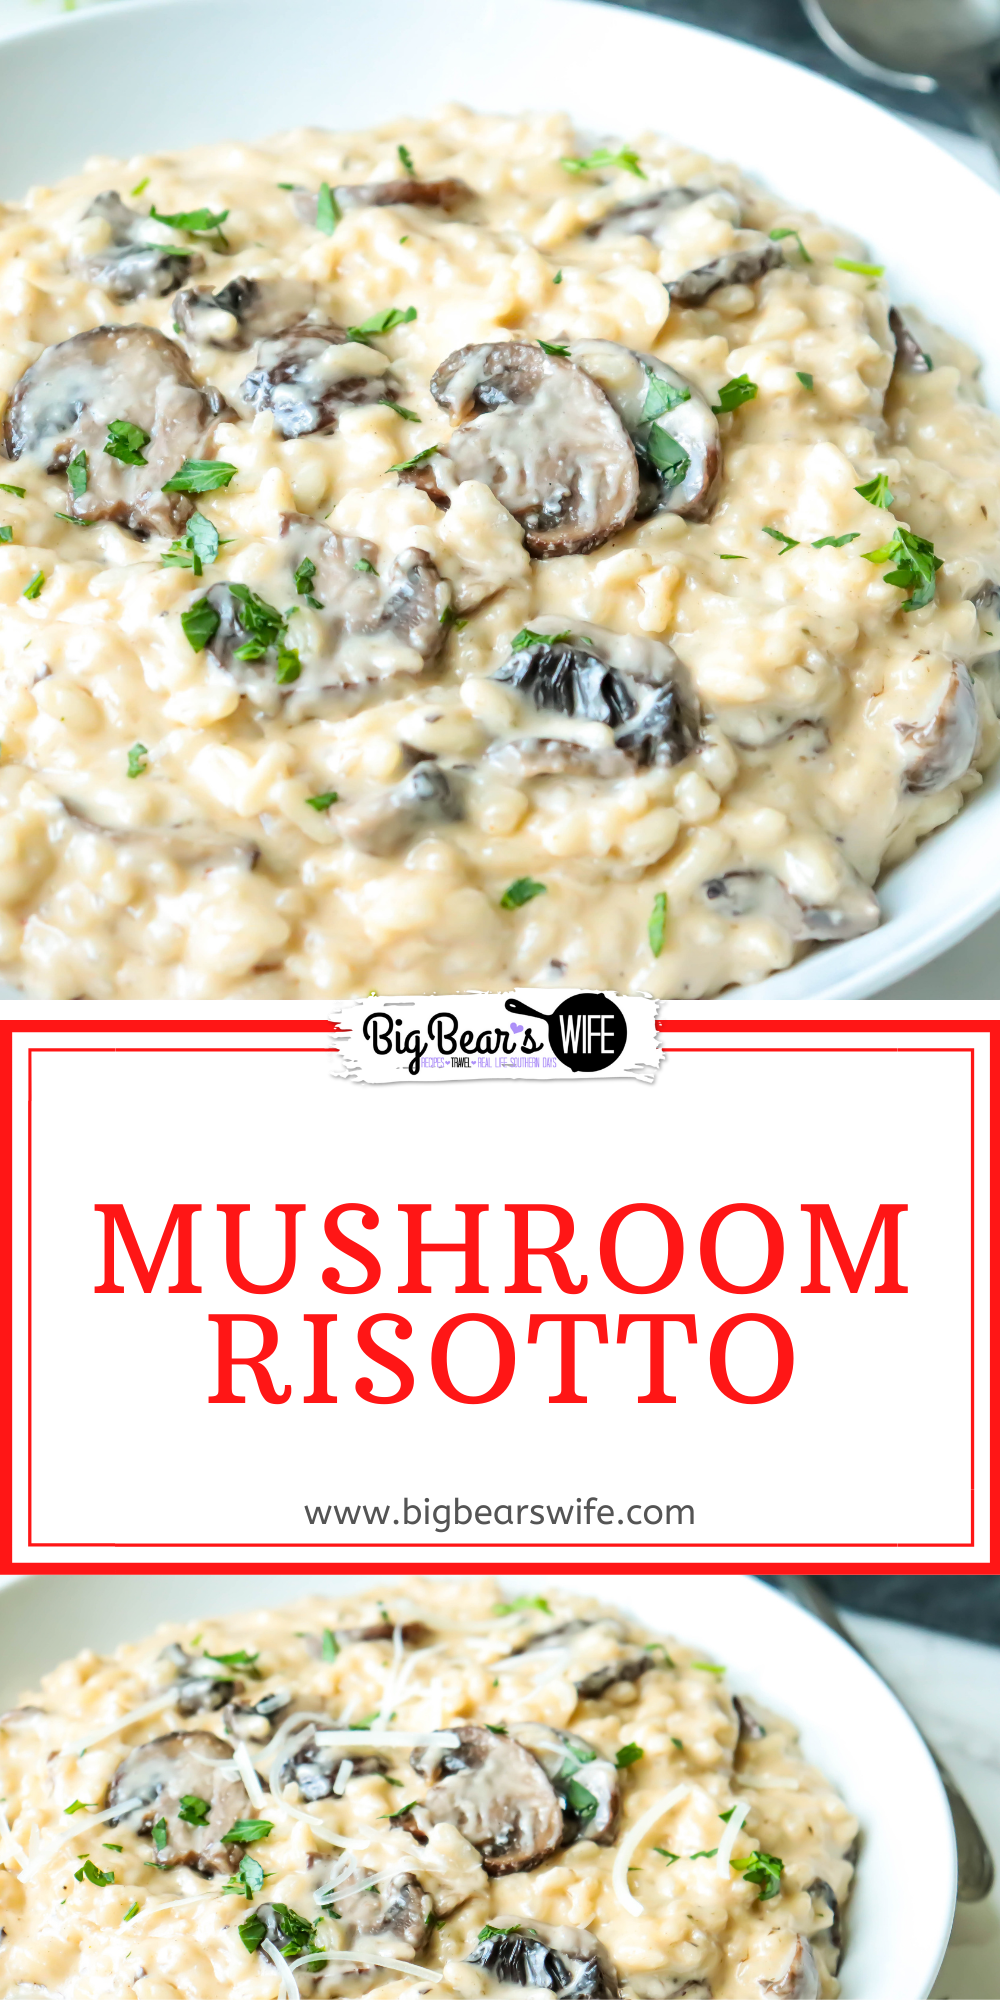 This homemade Mushroom Risotto is creamy, dreamy risotto perfection! Arborio rice, a flavorful stock, mushrooms and parmesan cheese with a bit of cream! via @bigbearswife